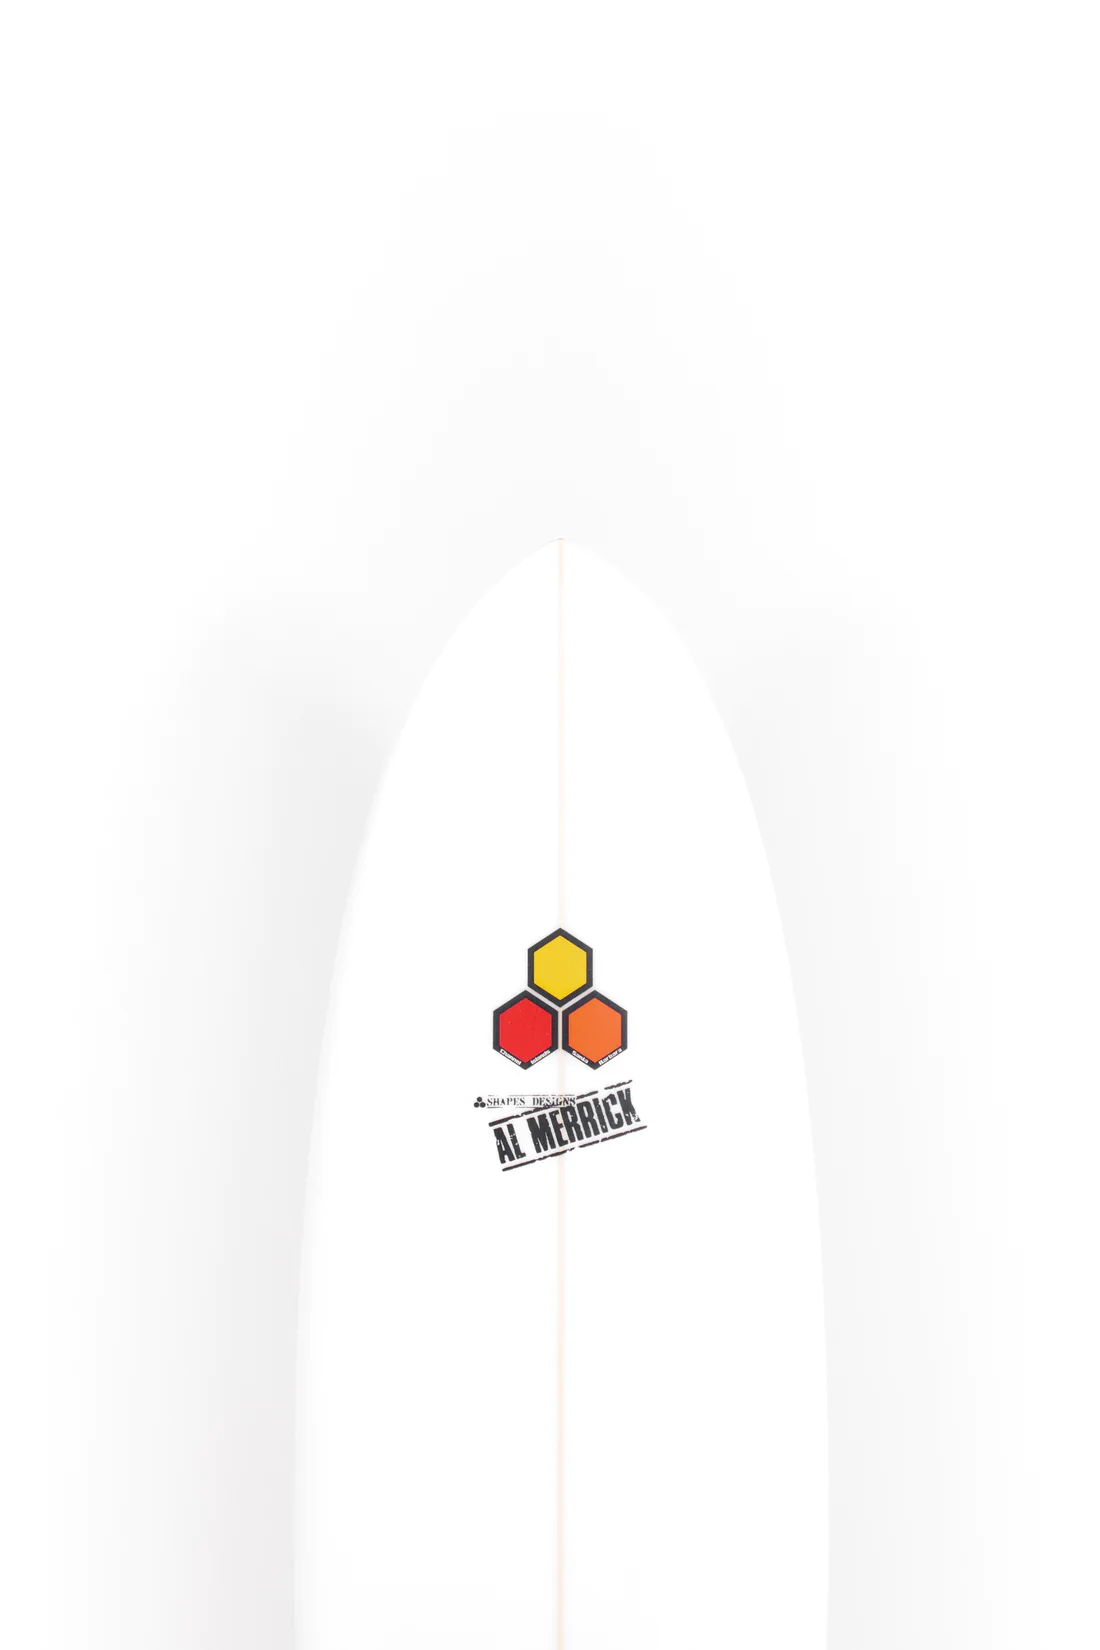 Channel Islands - BOBBY QUAD 6'0